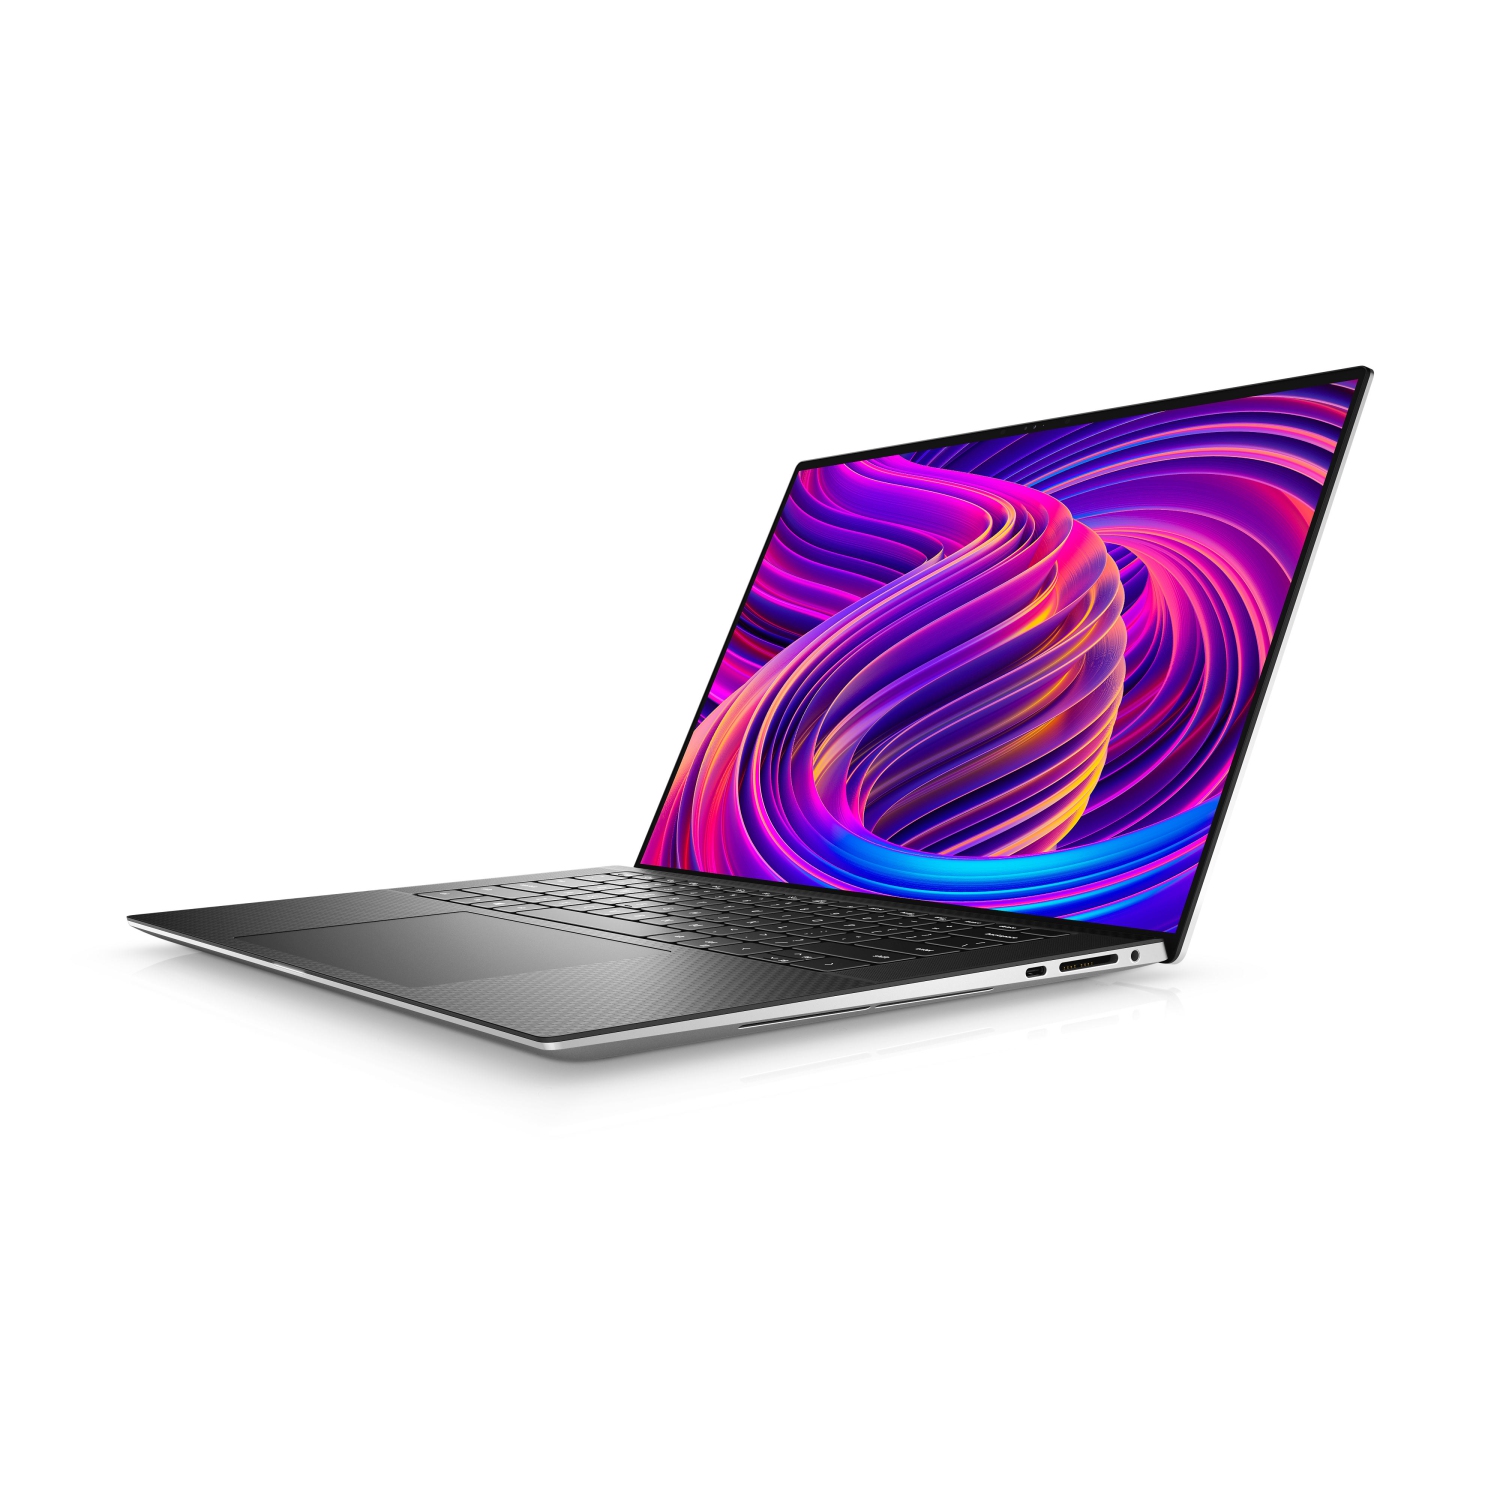 Refurbished (Excellent) - Dell XPS 15 9510 Laptop (2021) | 15.6" FHD+ | Core i7 - 1TB SSD - 32GB RAM - RTX 3050 | 8 Cores @ 4.6 GHz - 11th Gen CPU Certified Refurbished